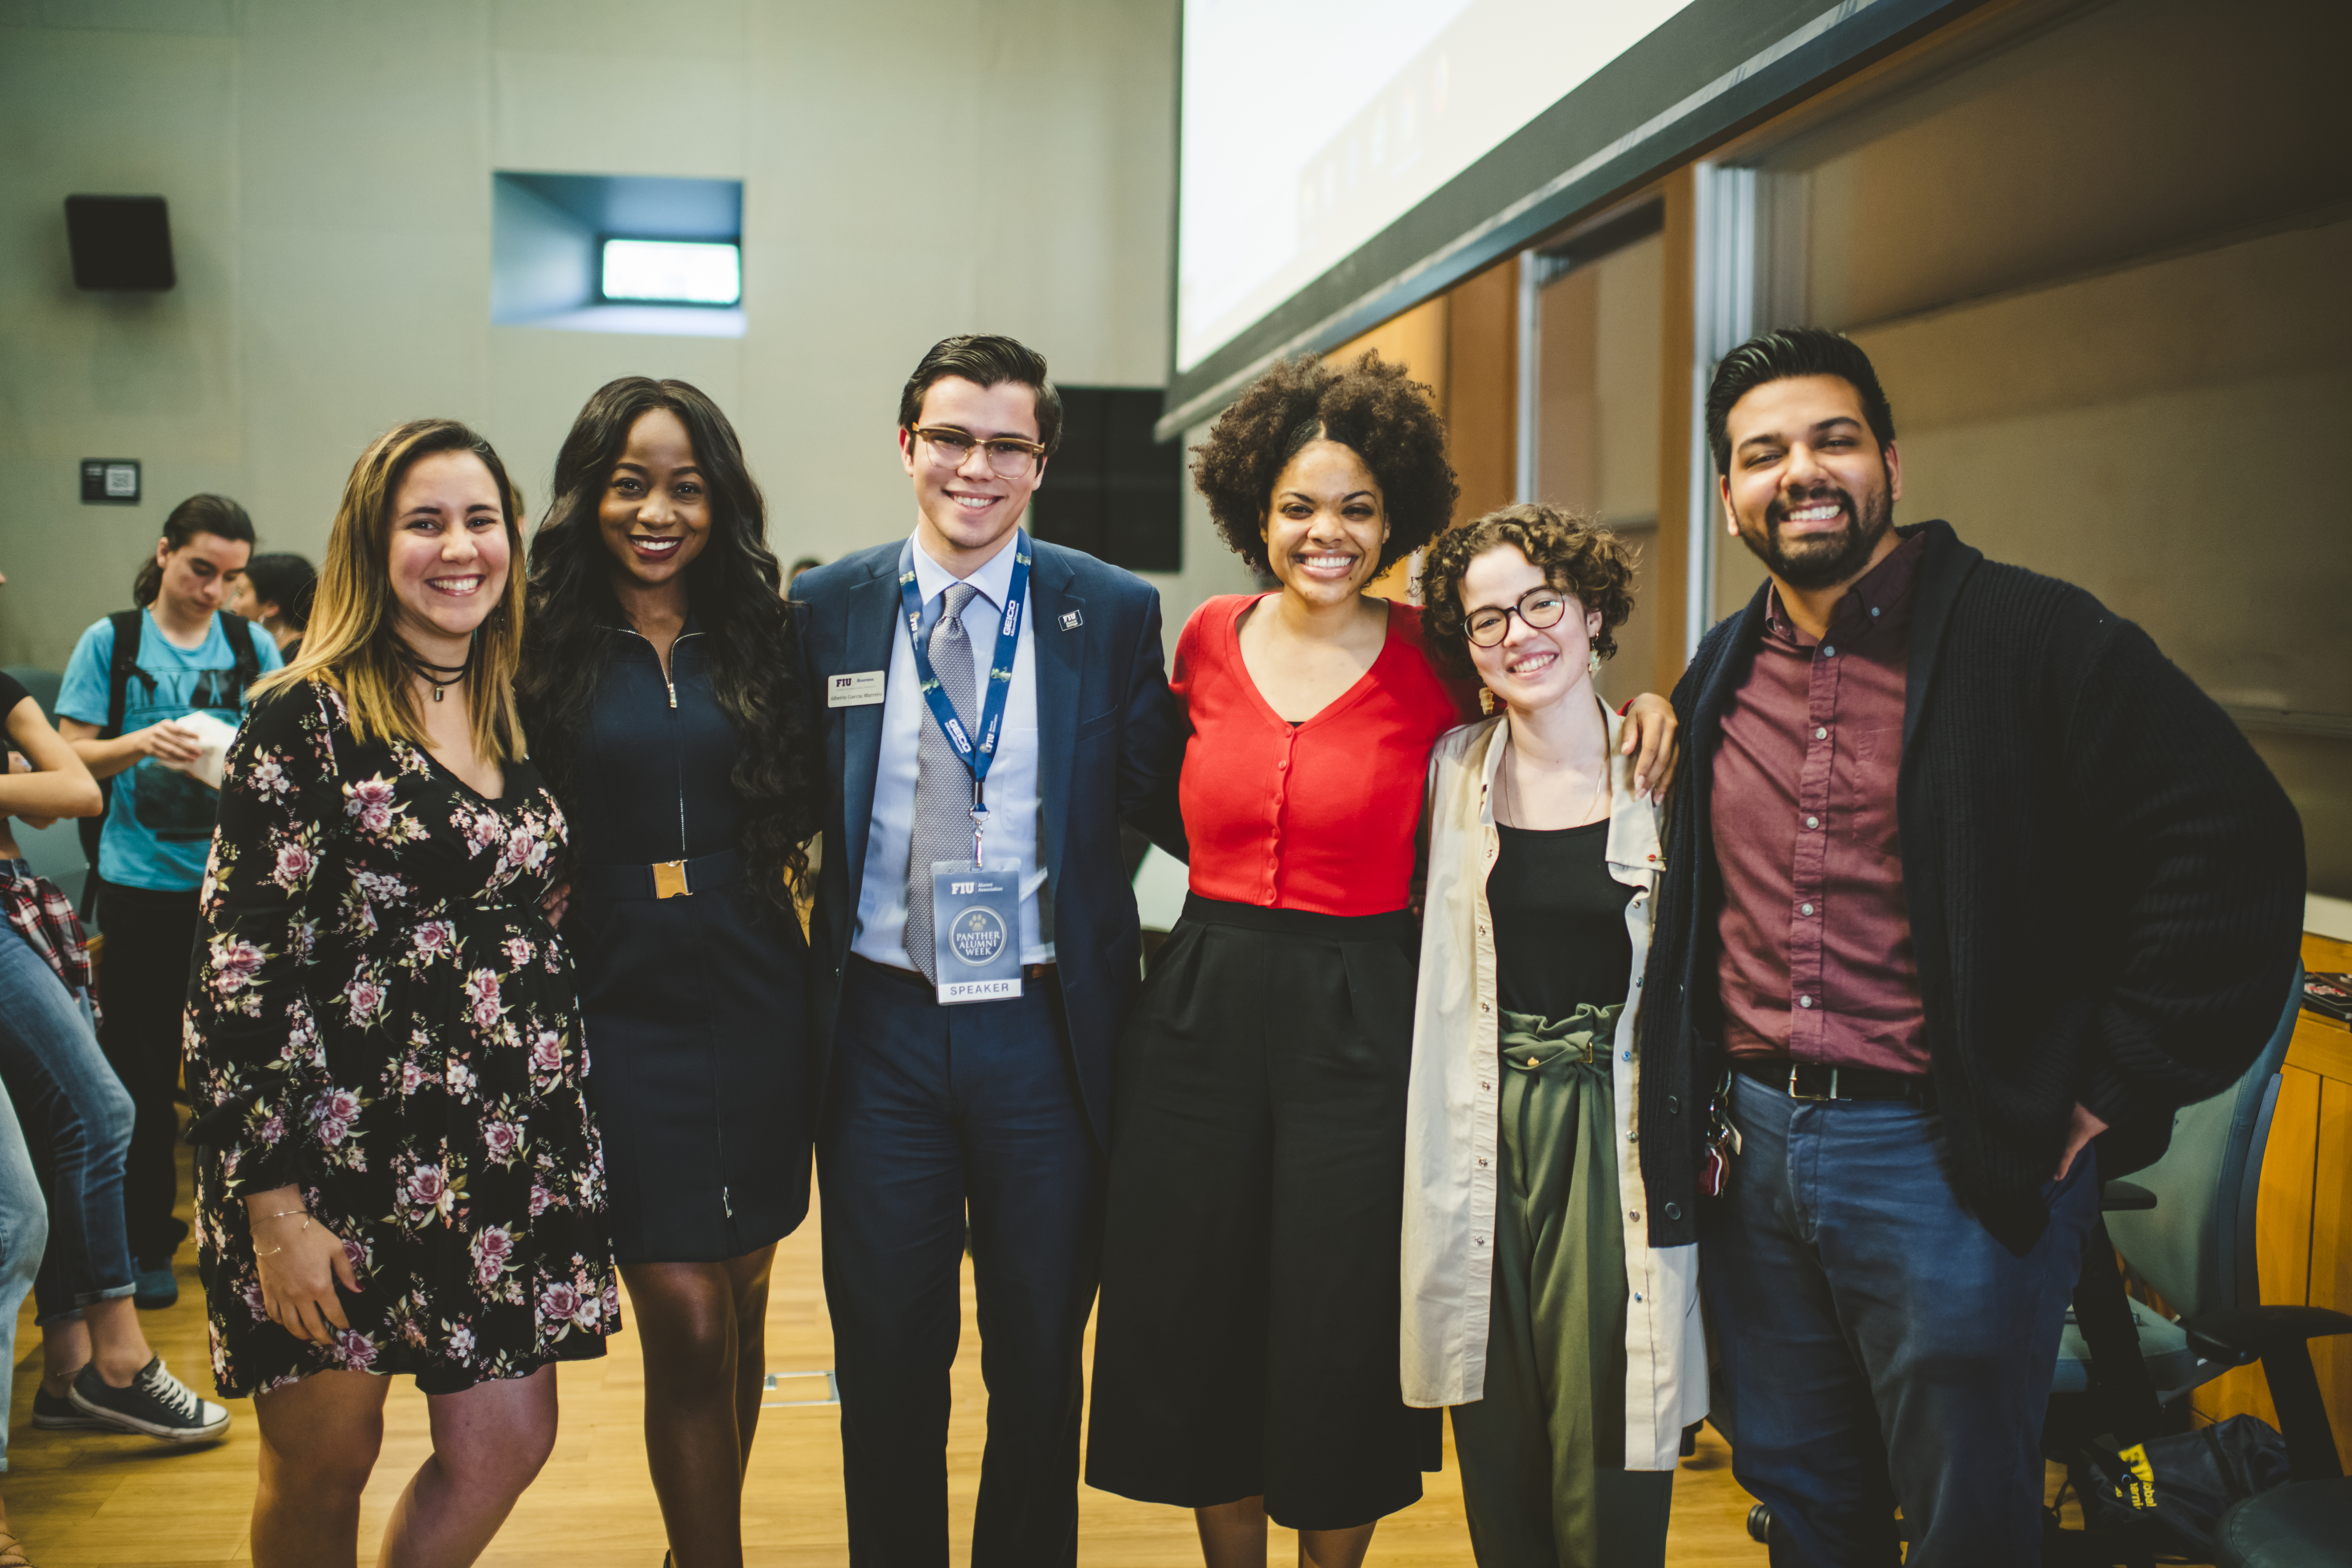 Pictured from left to right: Yeni Simon, Program Manager for Global Learning, Cindy Makita, Alberto Garcia Marrero, Yandra Mariano, Isabella Marie Garcia (all alumni panelists), and Enrique Rosell, Program Coordinator for The Honors College.